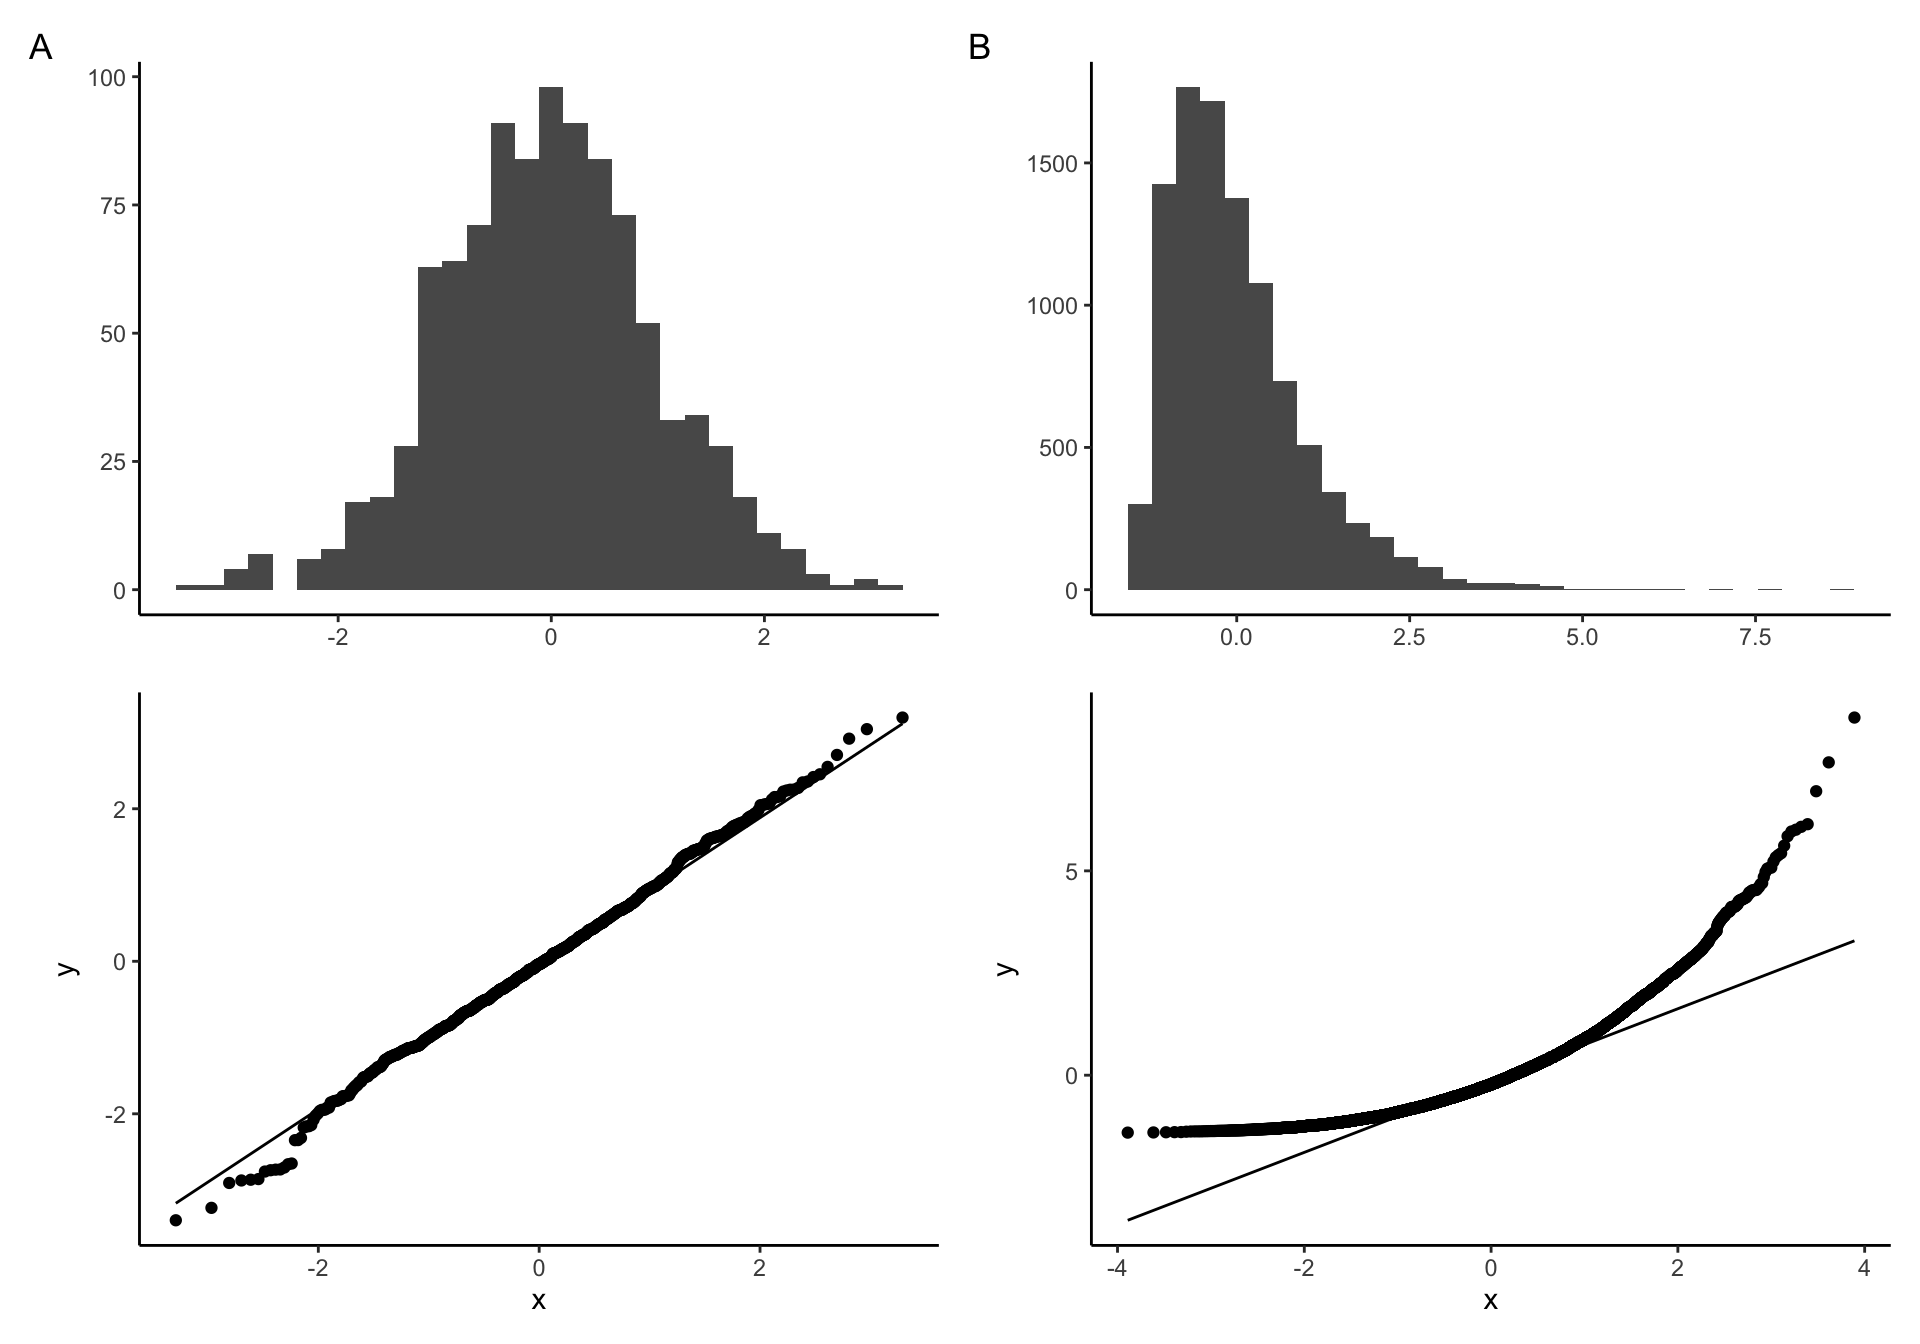 Q-Q plot examples of A) Normally distributed B) non-nonormally distributed data